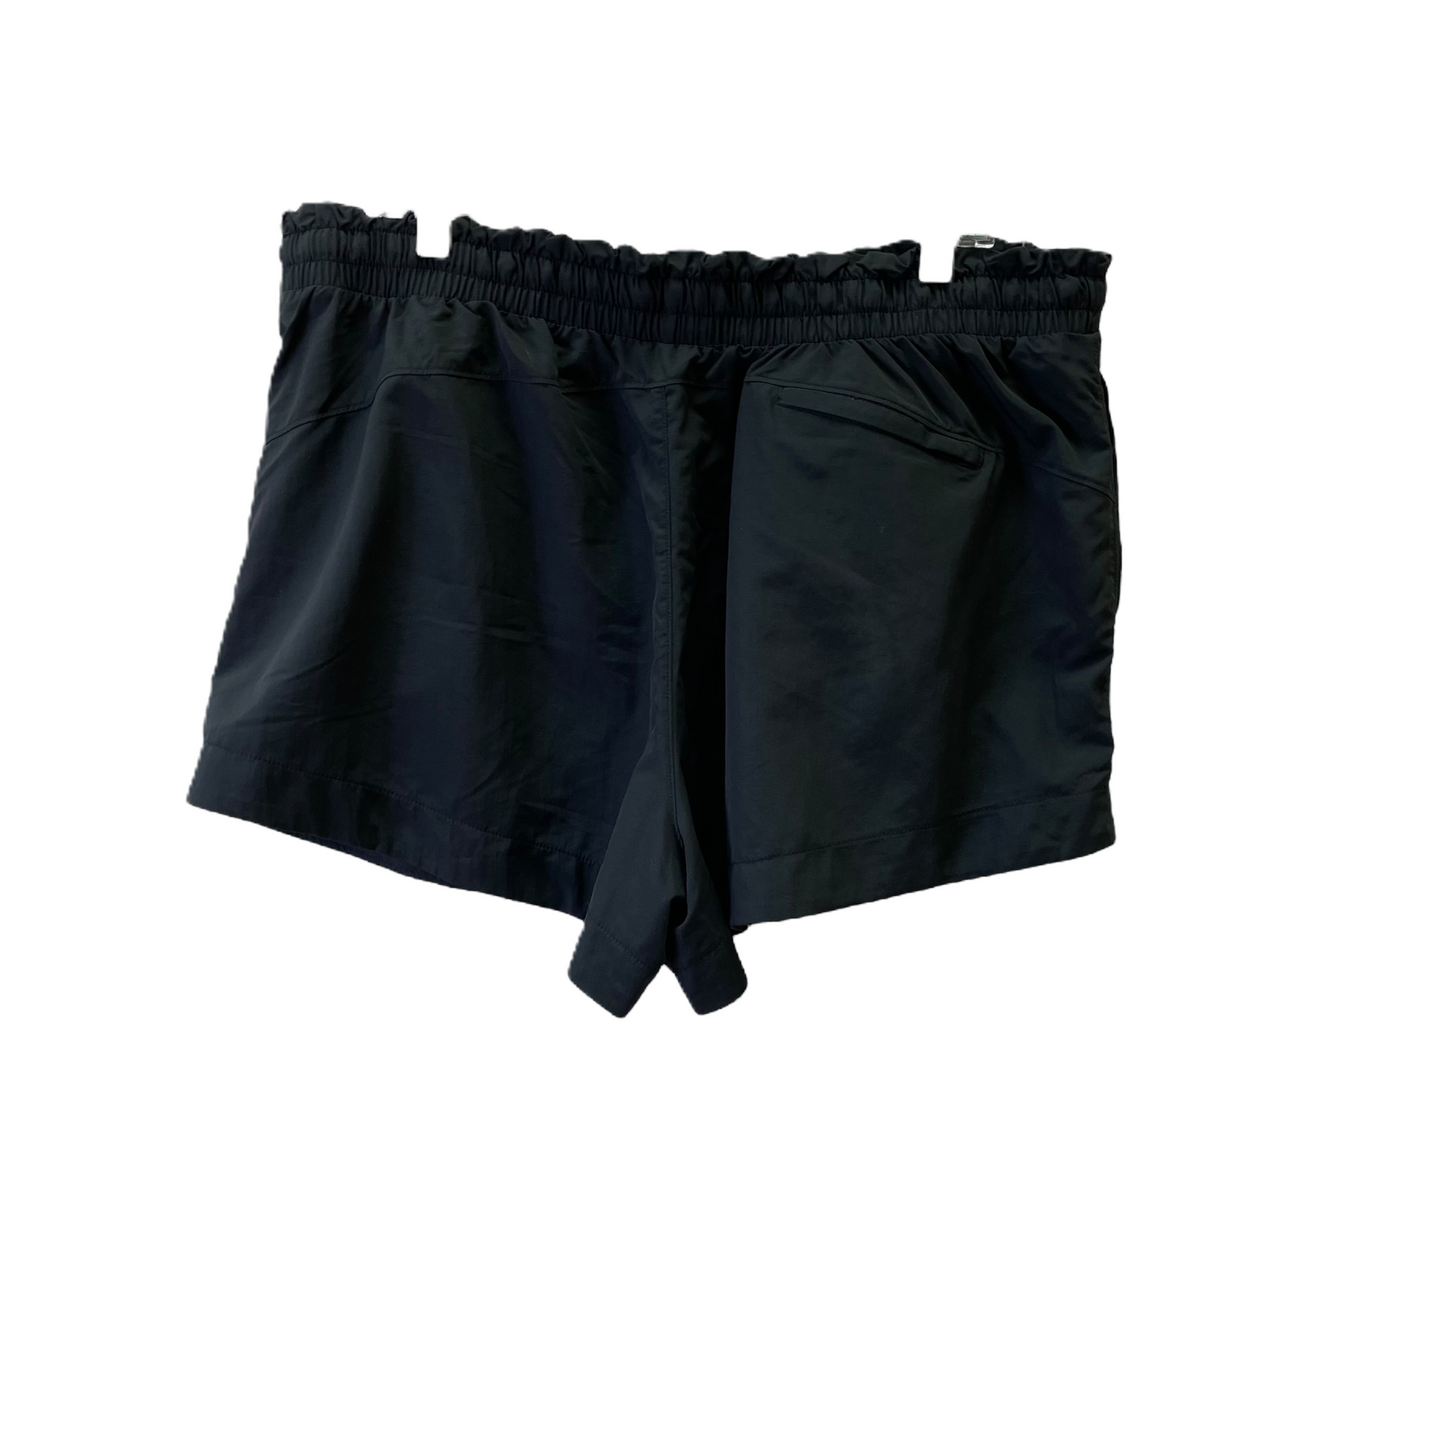 Black Shorts By All In Motion, Size: Xxl